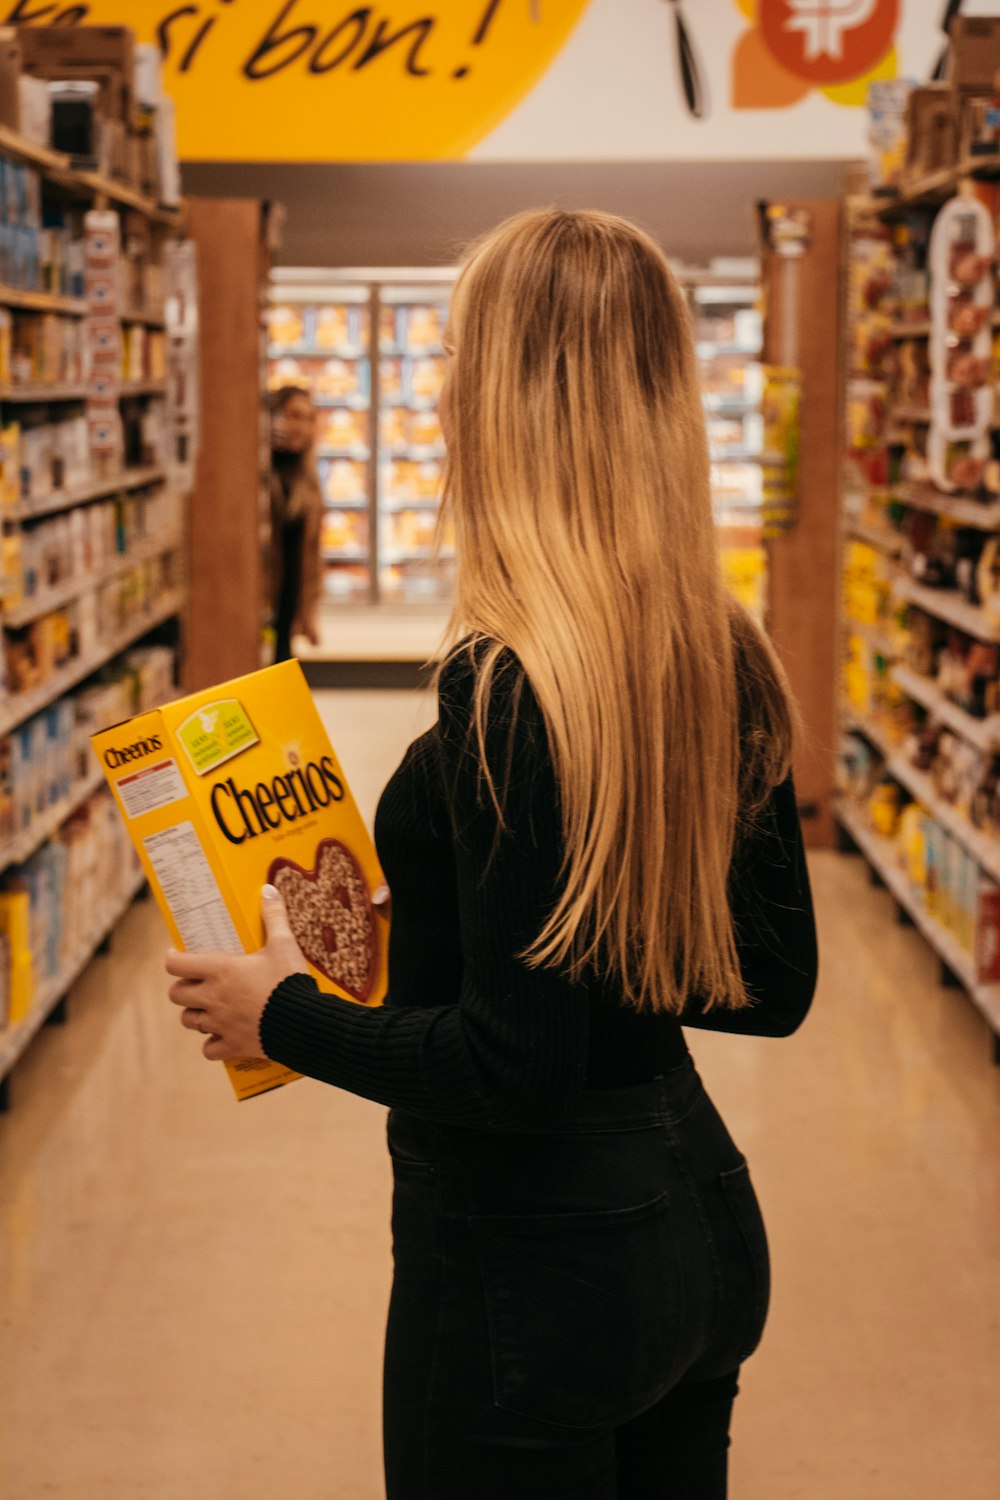 woman wearing black long-sleeved shirt holding Cheerios cereal box standing